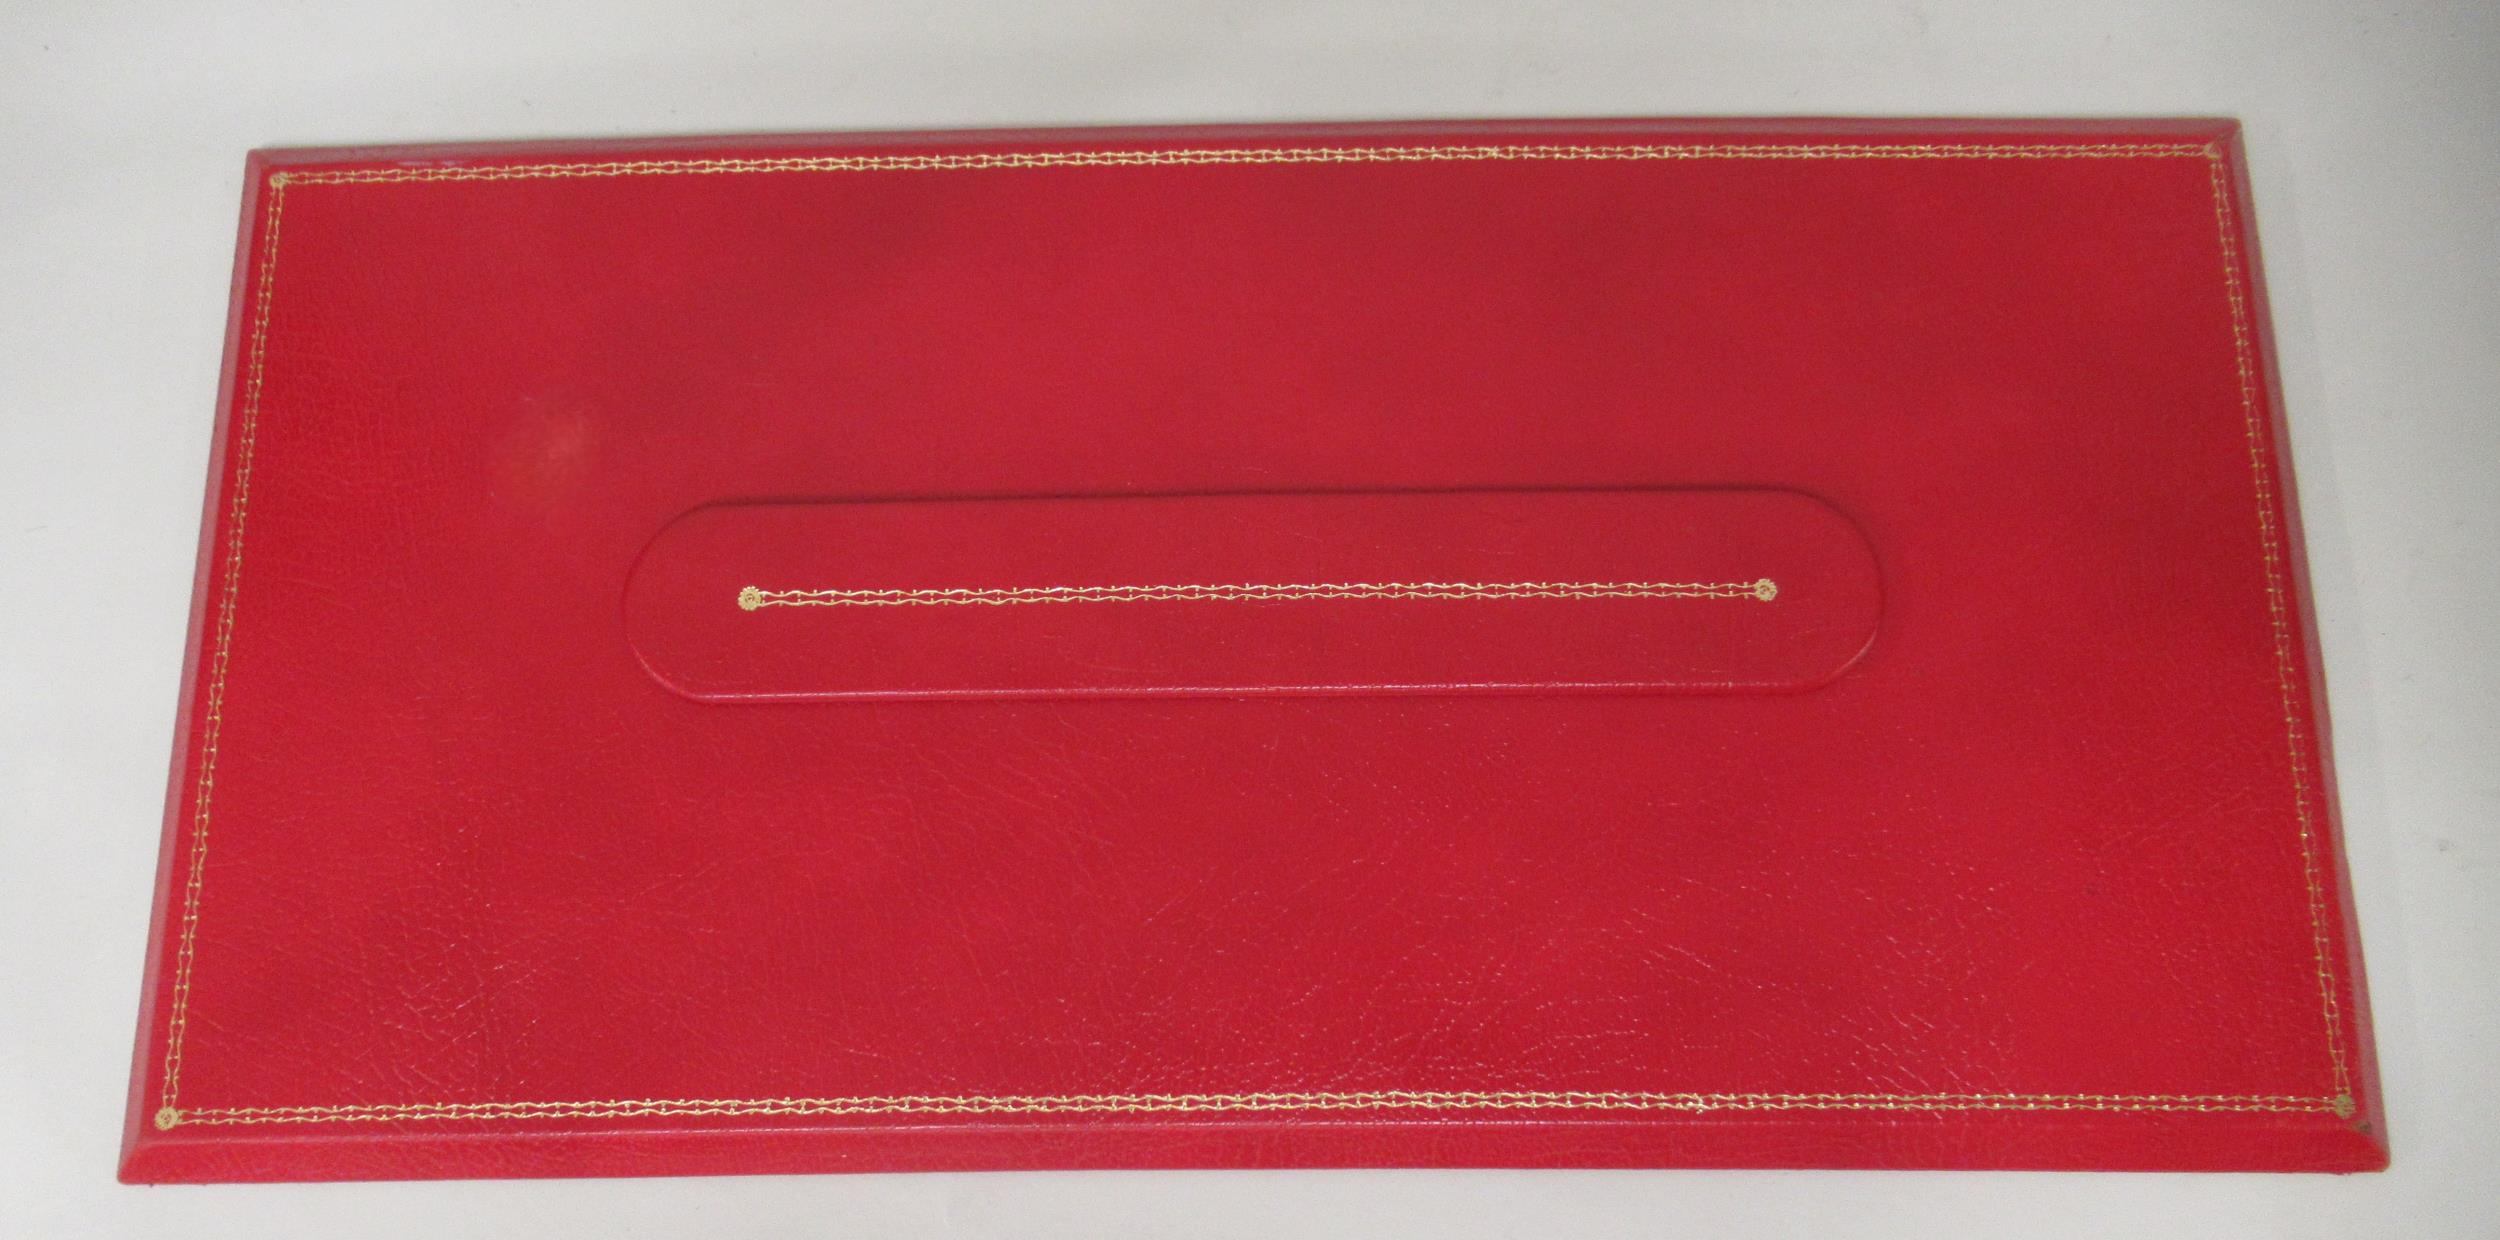 Smythson of Bond Street, red tooled leather table planner